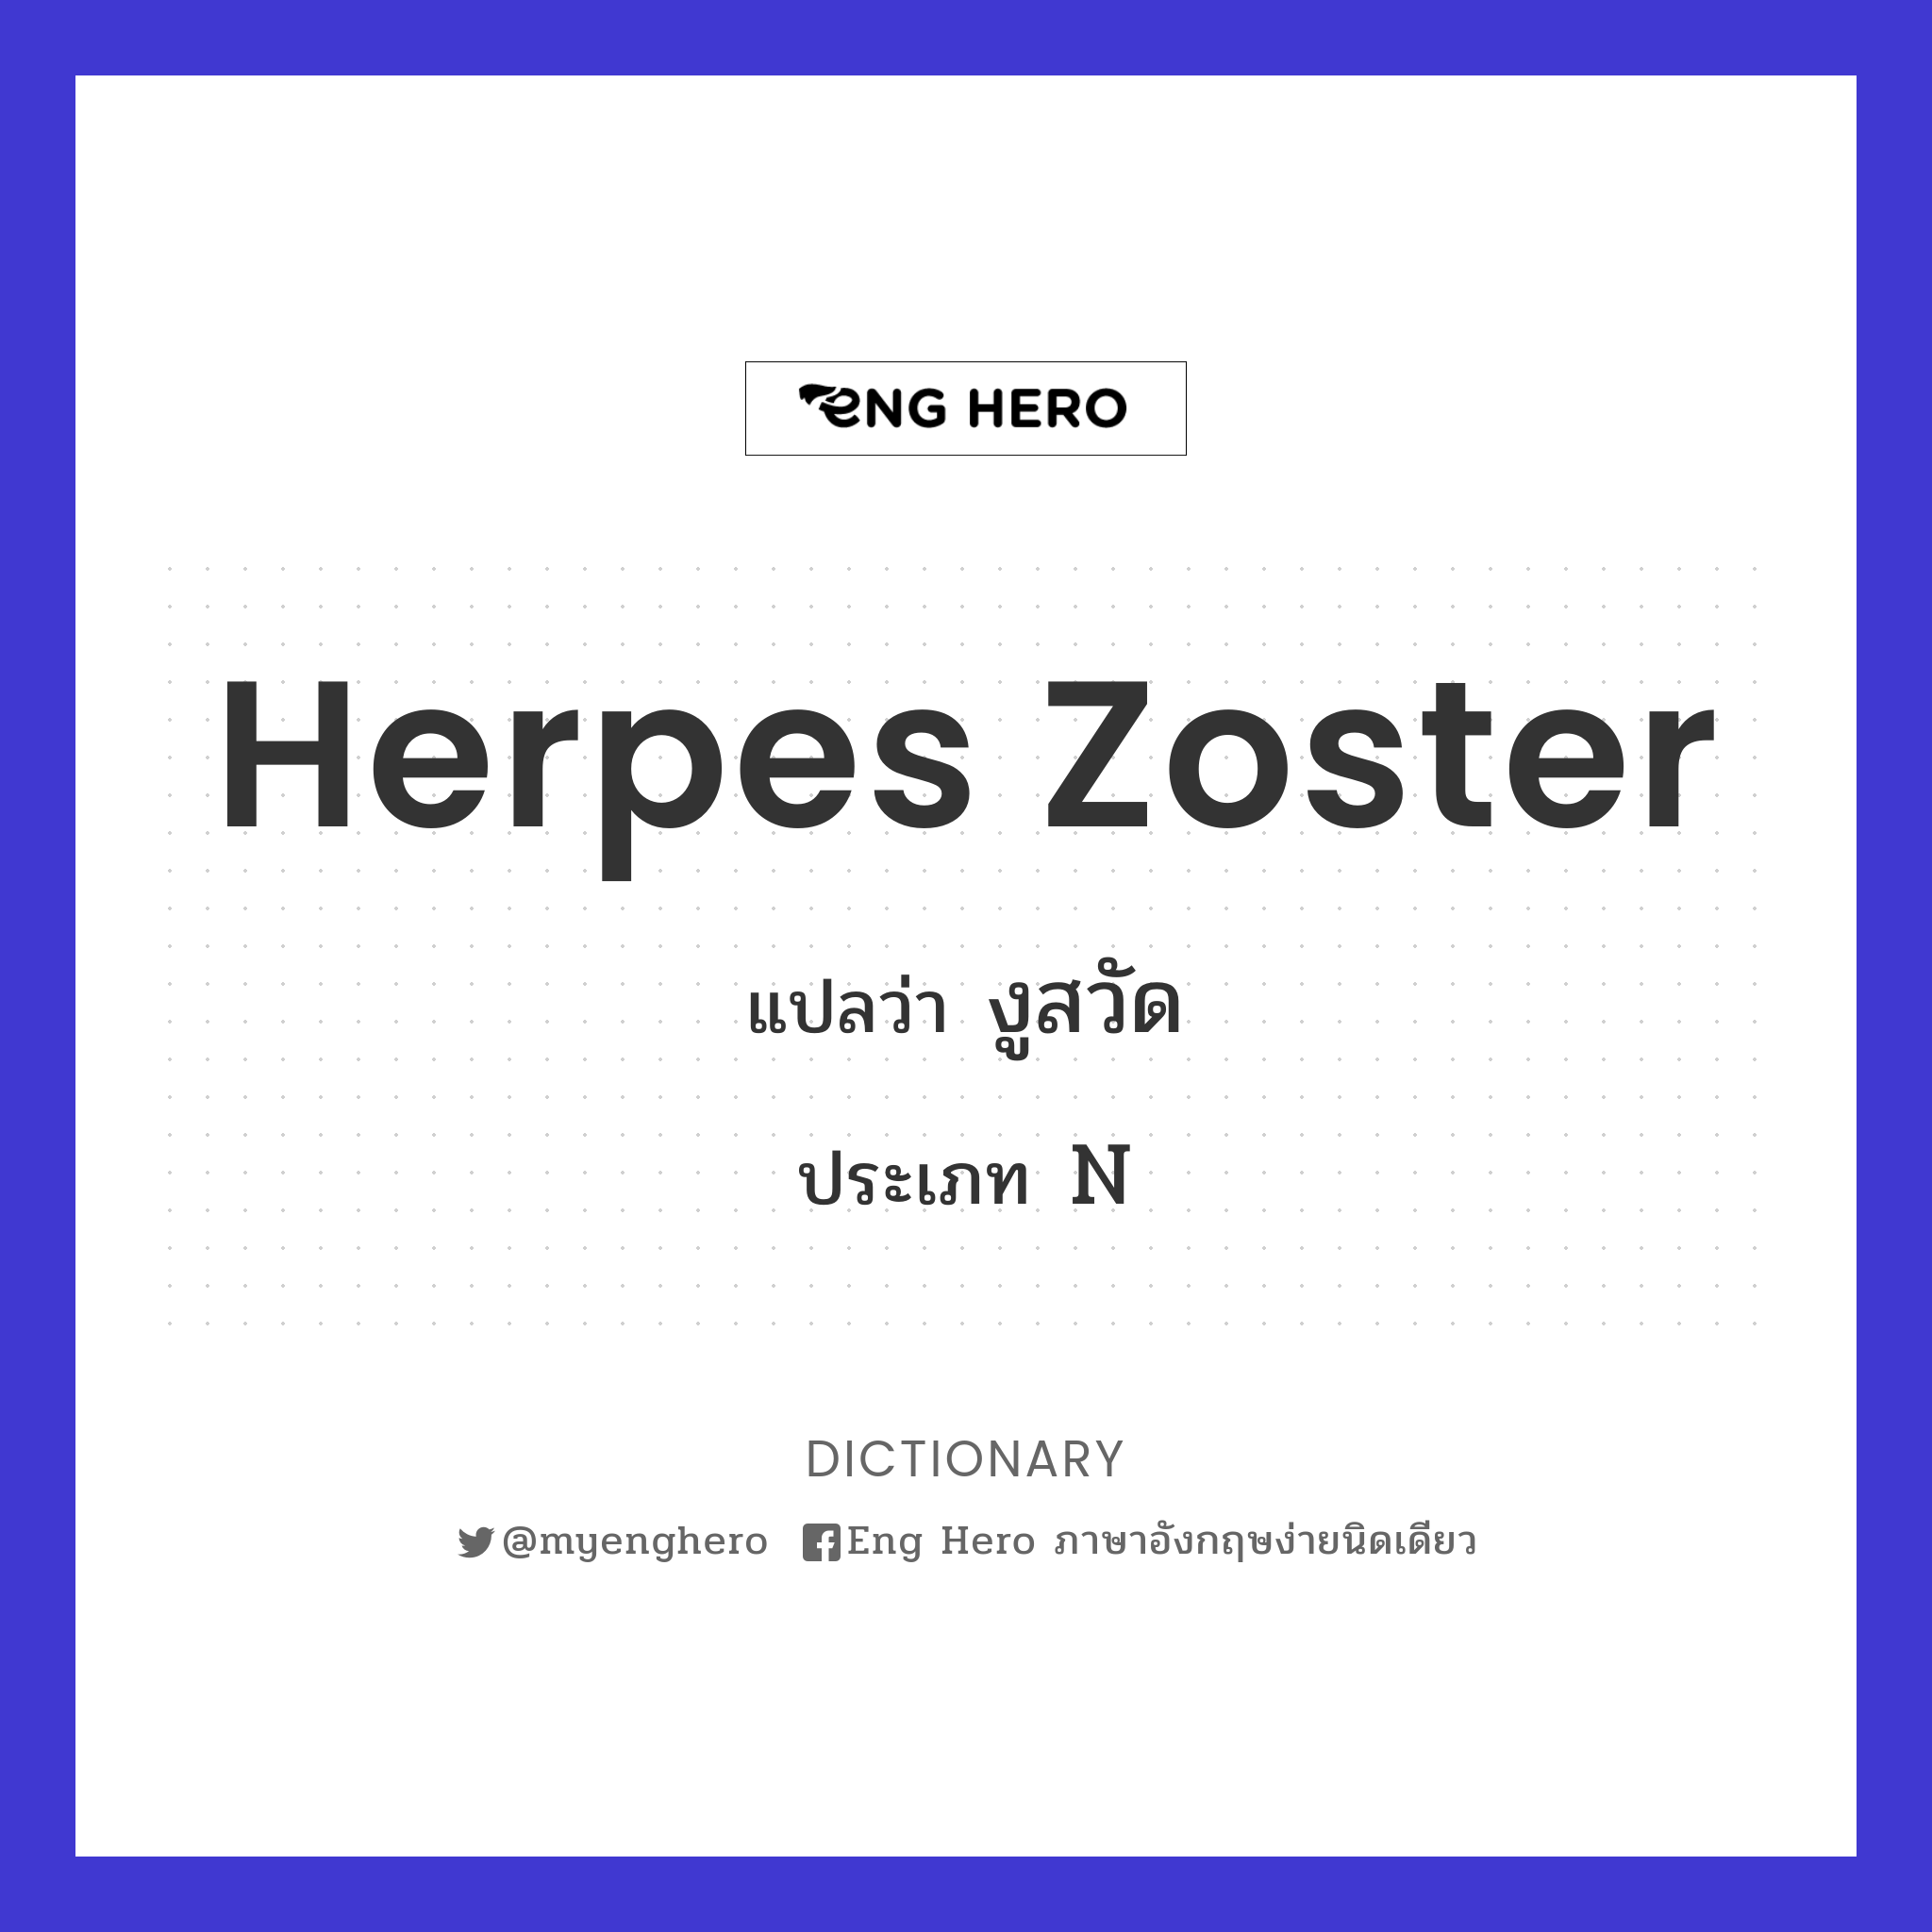 herpes zoster